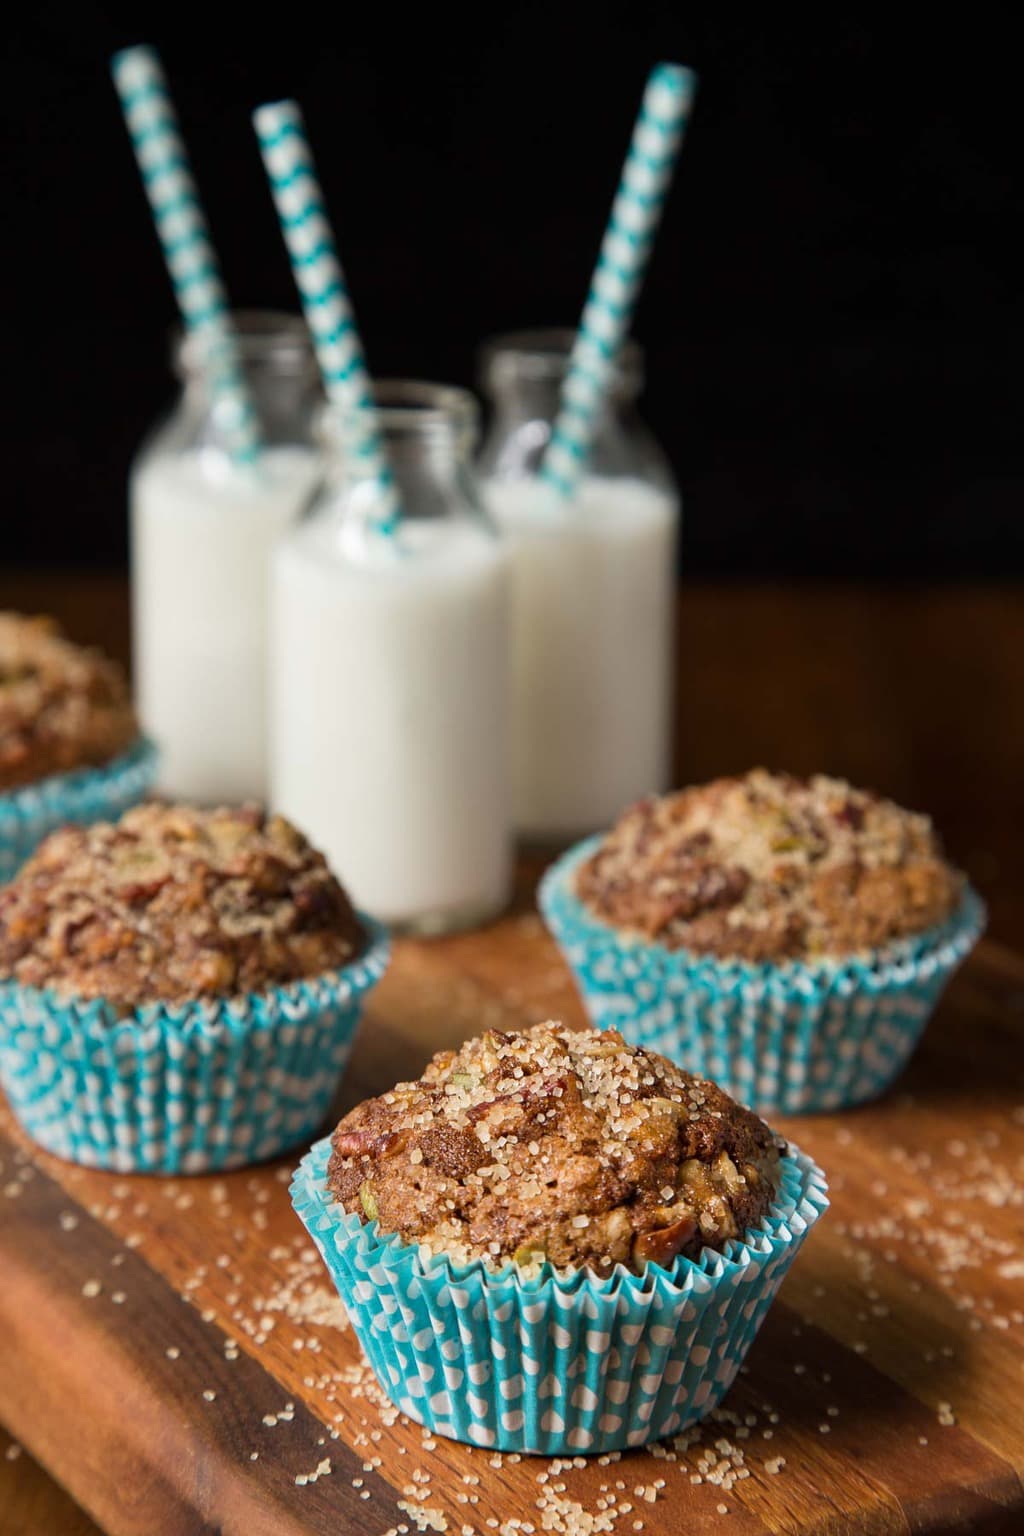 Photo of four Zucchini Morning Glory Muffins on a wood cutting board with small bottles of milk in the background.